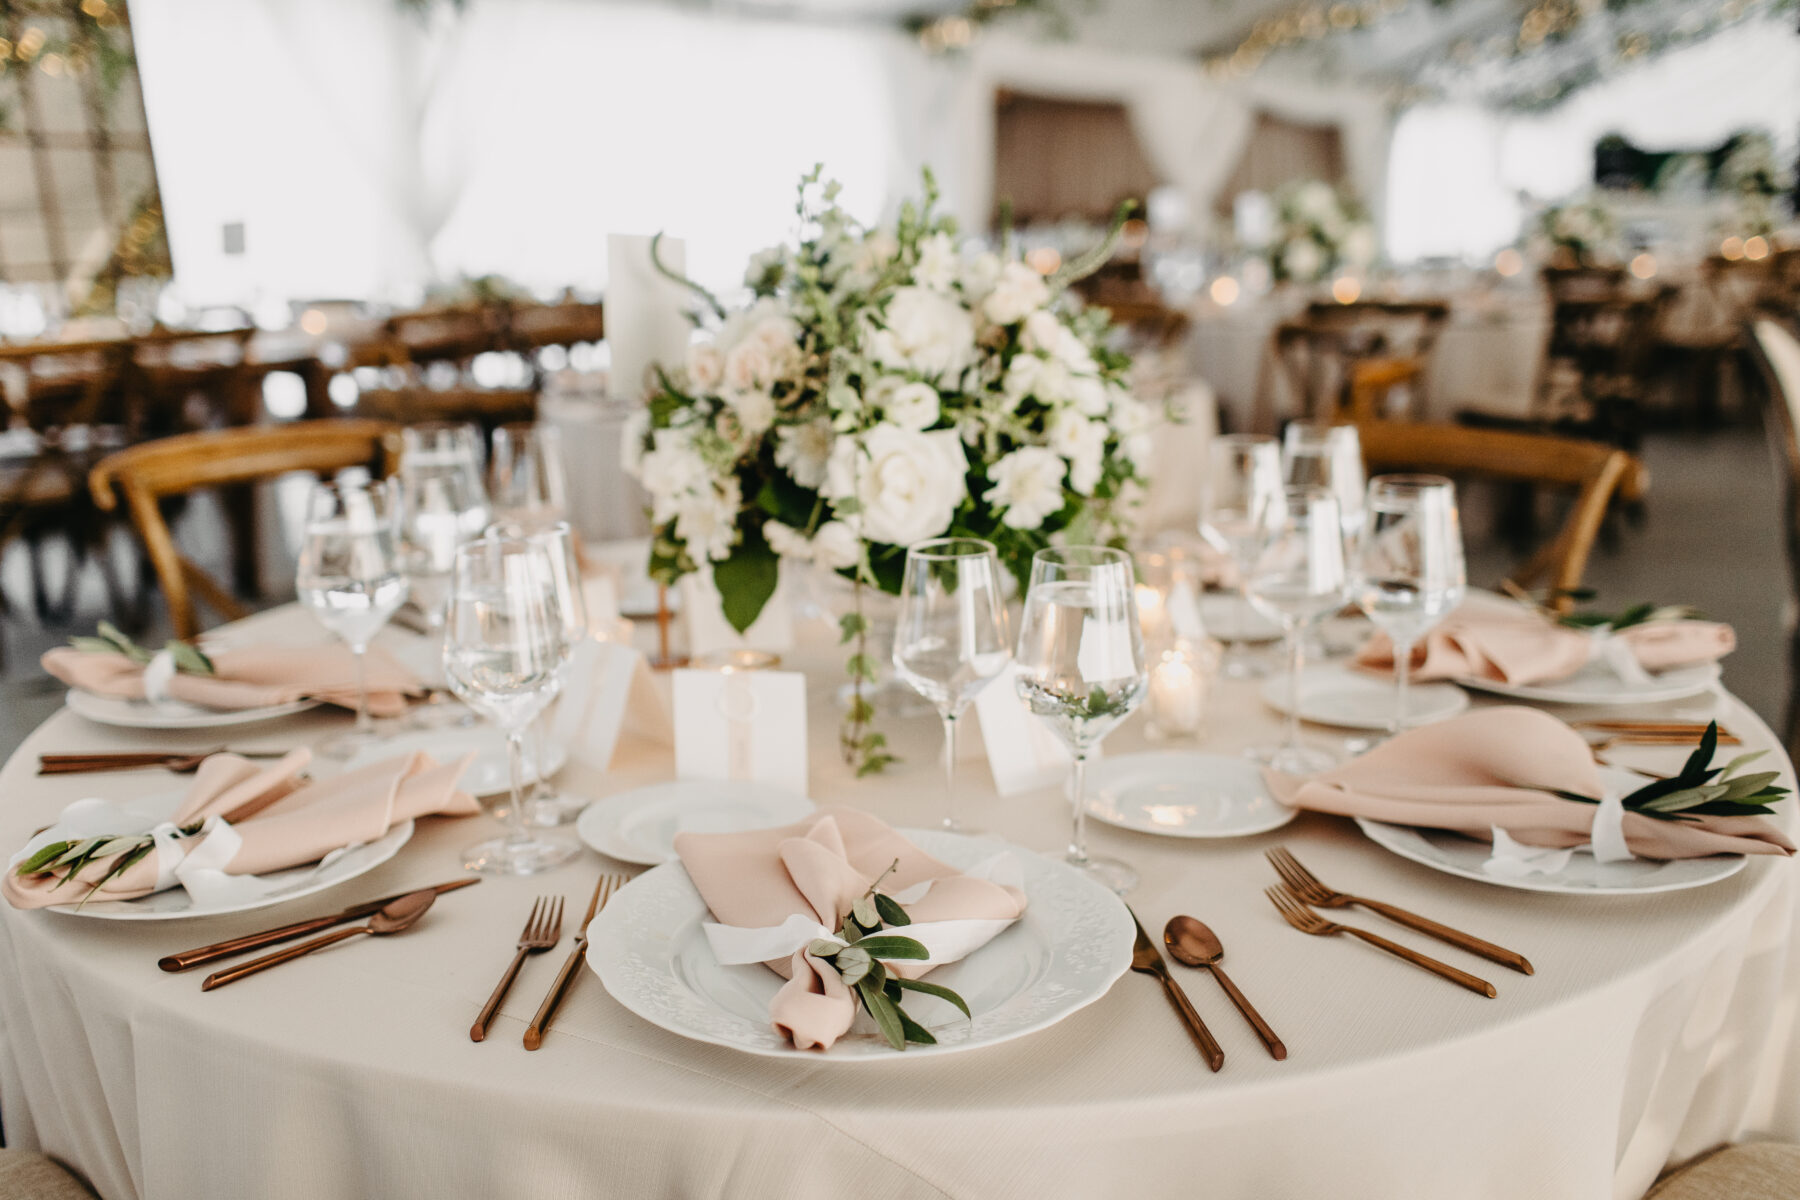 How to Make Your Wedding Your Own from Premier W.E.D. featured on Nashville Bride Guide